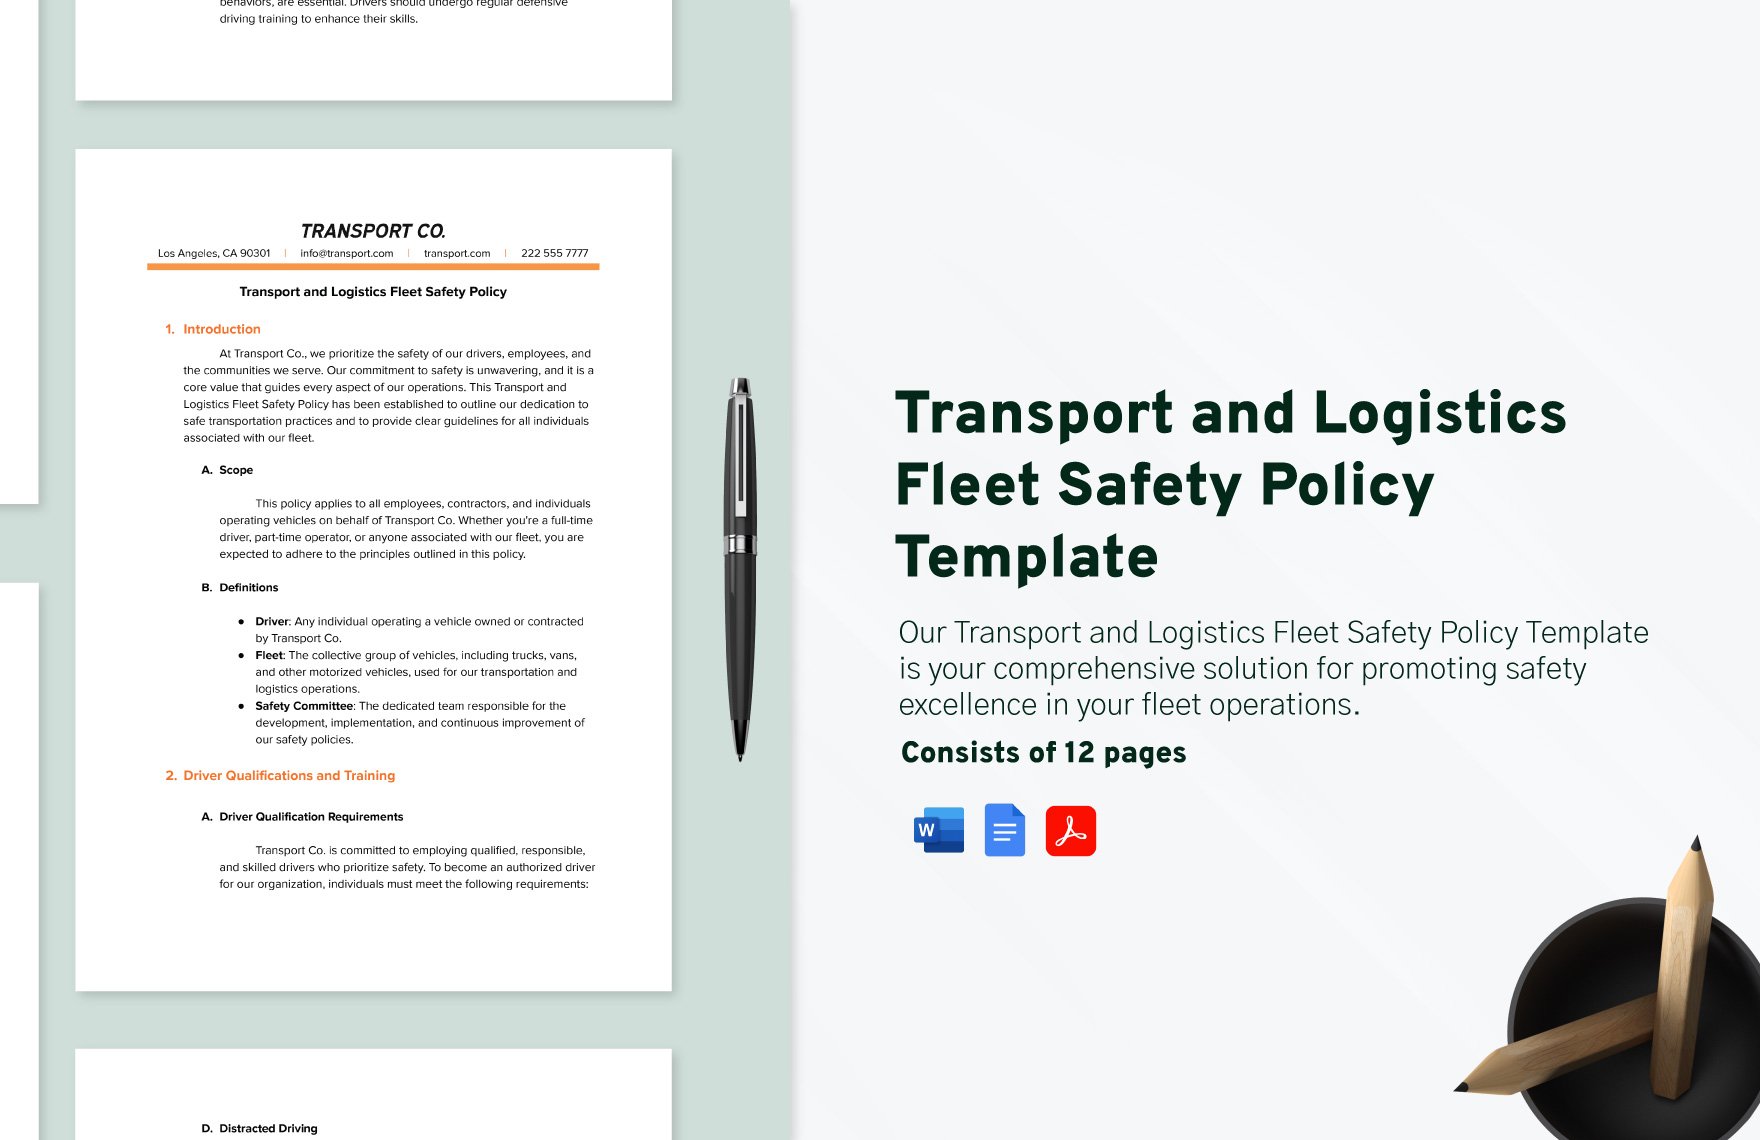 Transport and Logistics Fleet Safety Policy Template